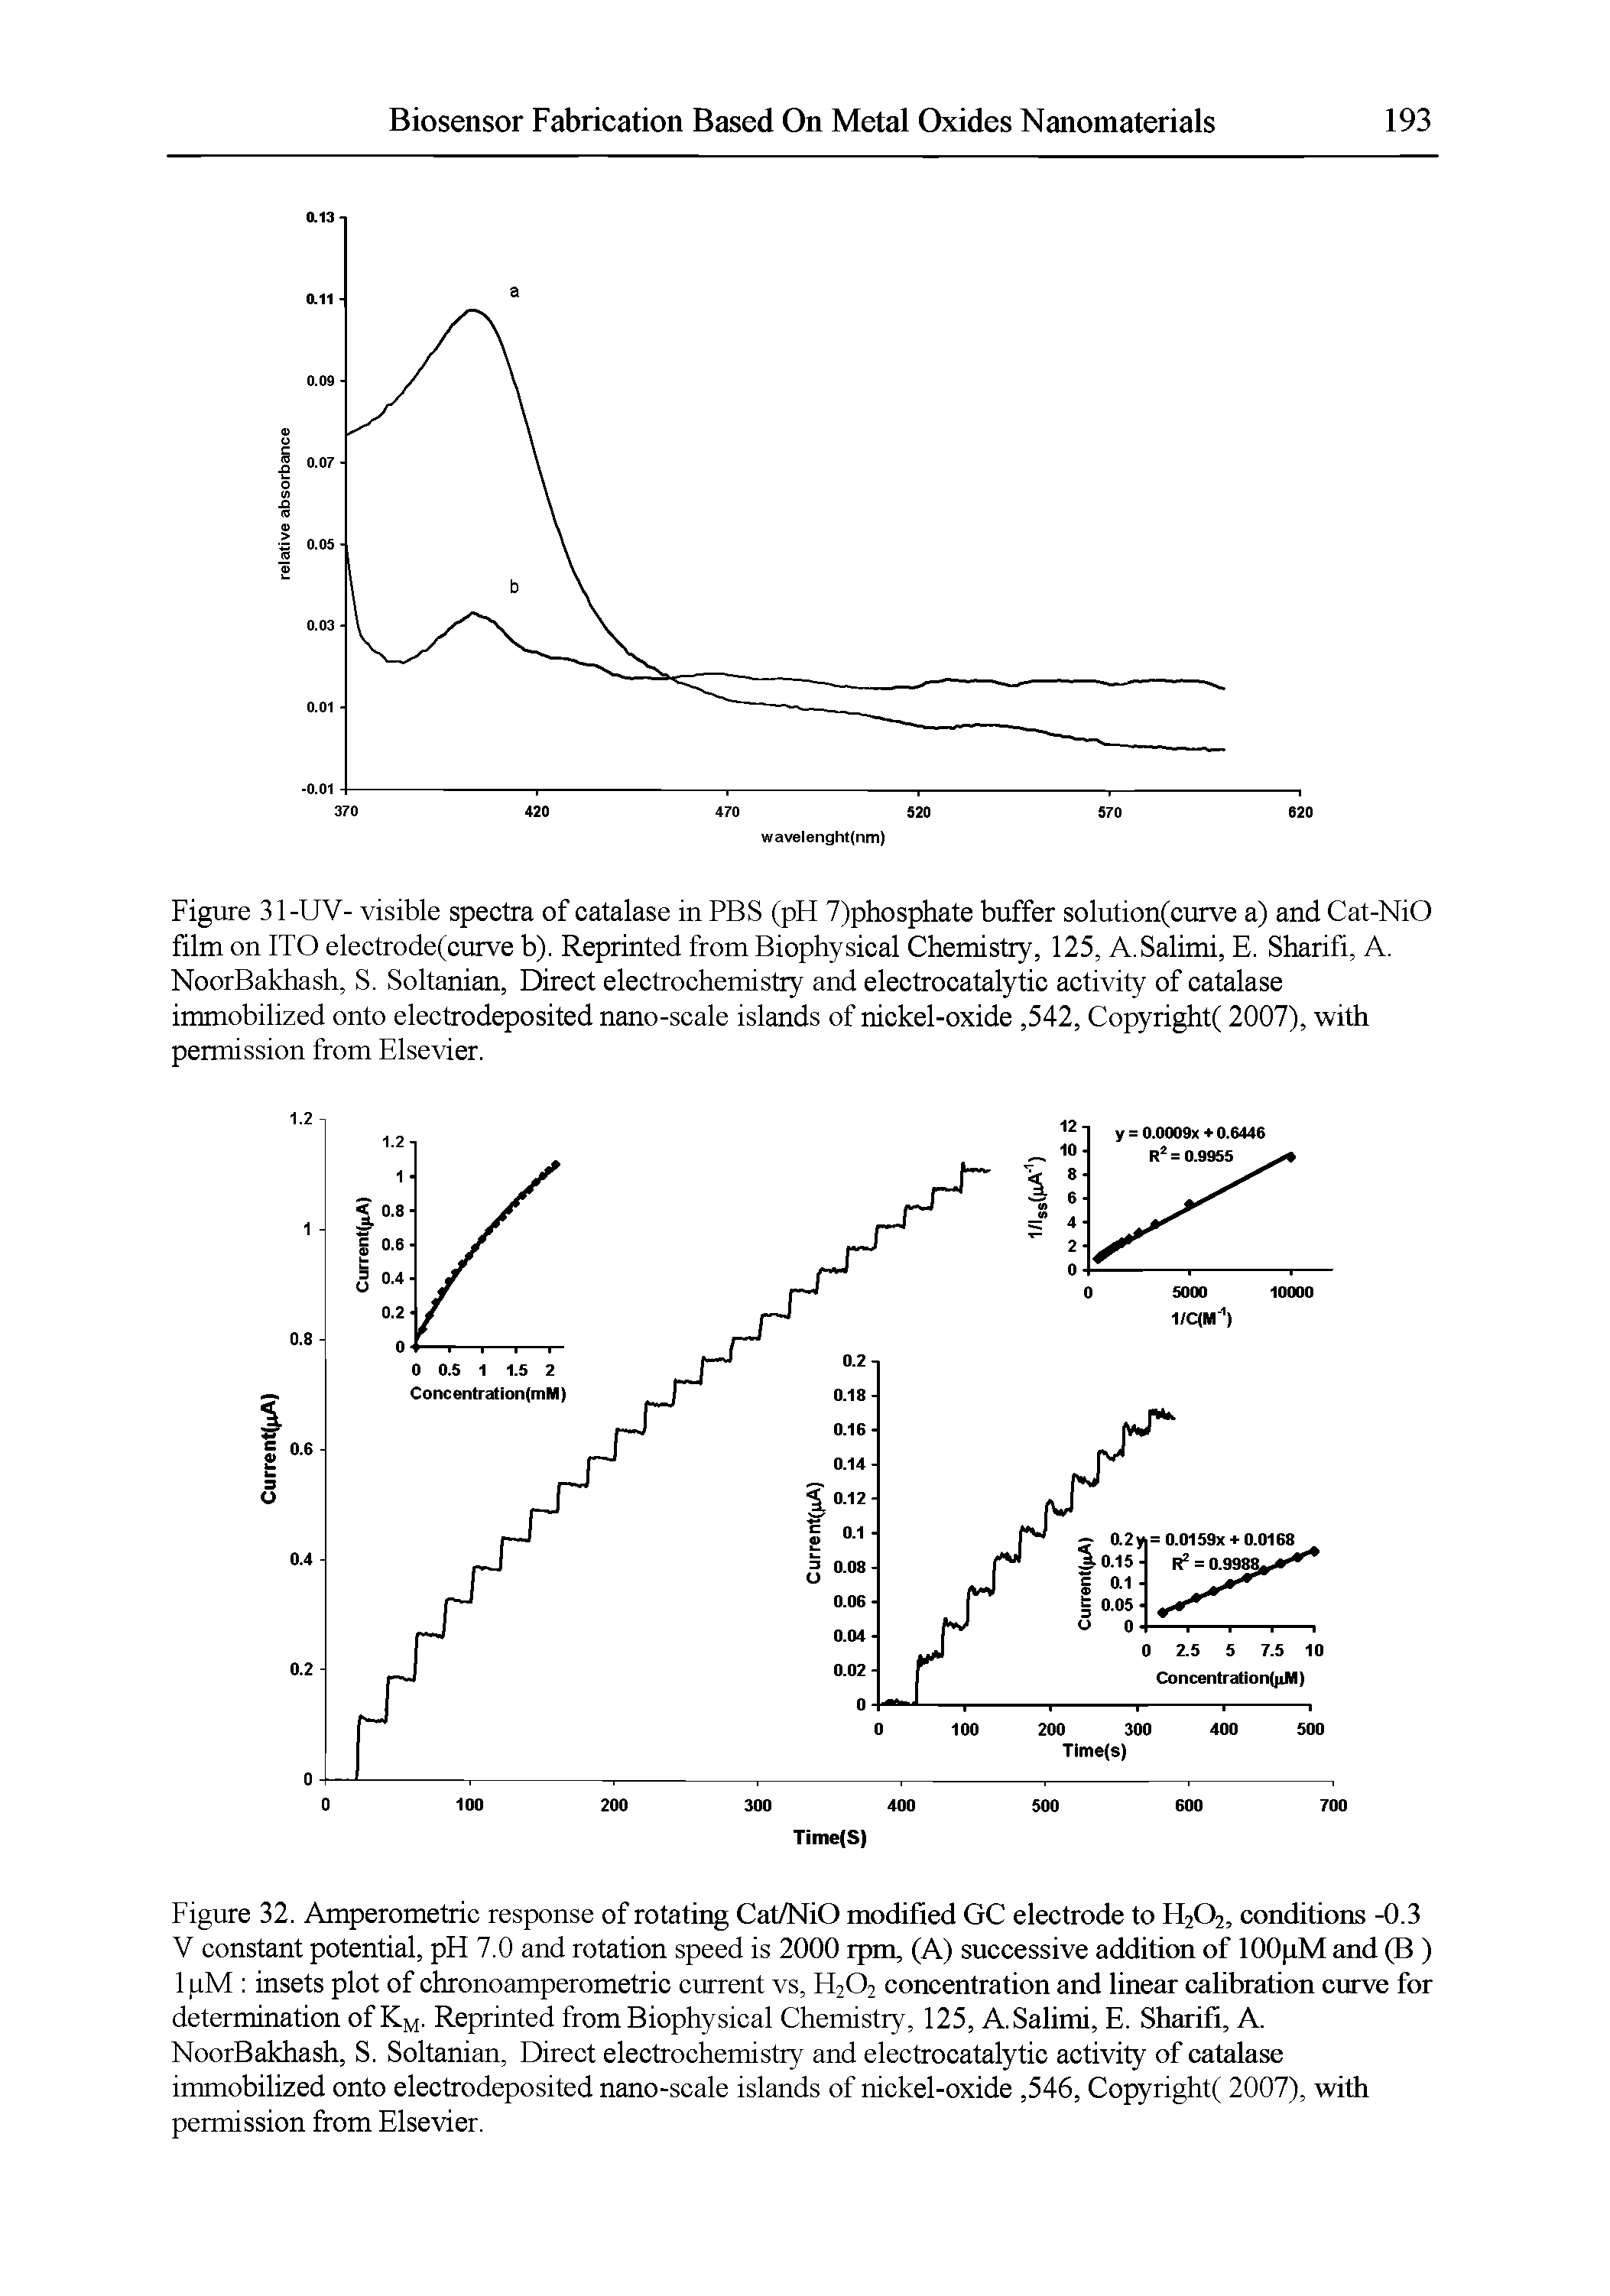 Figure 31-UV- visible spectra of catalase in PBS (pH 7)phosphate buffer solution(curve a) and Cat-NiO film on ITO electrode(curve b). Reprinted from Biophysical Chemistry, 125, A.Salimi, E. Sharifi, A. NoorBakhash, S. Soltanian, Direct electrochemistry and electrocatalytic activity of catalase immobilized onto electrodeposited nano-scale islands of nickel-oxide, 542, Copyright( 2007), with permission from Elsevier.